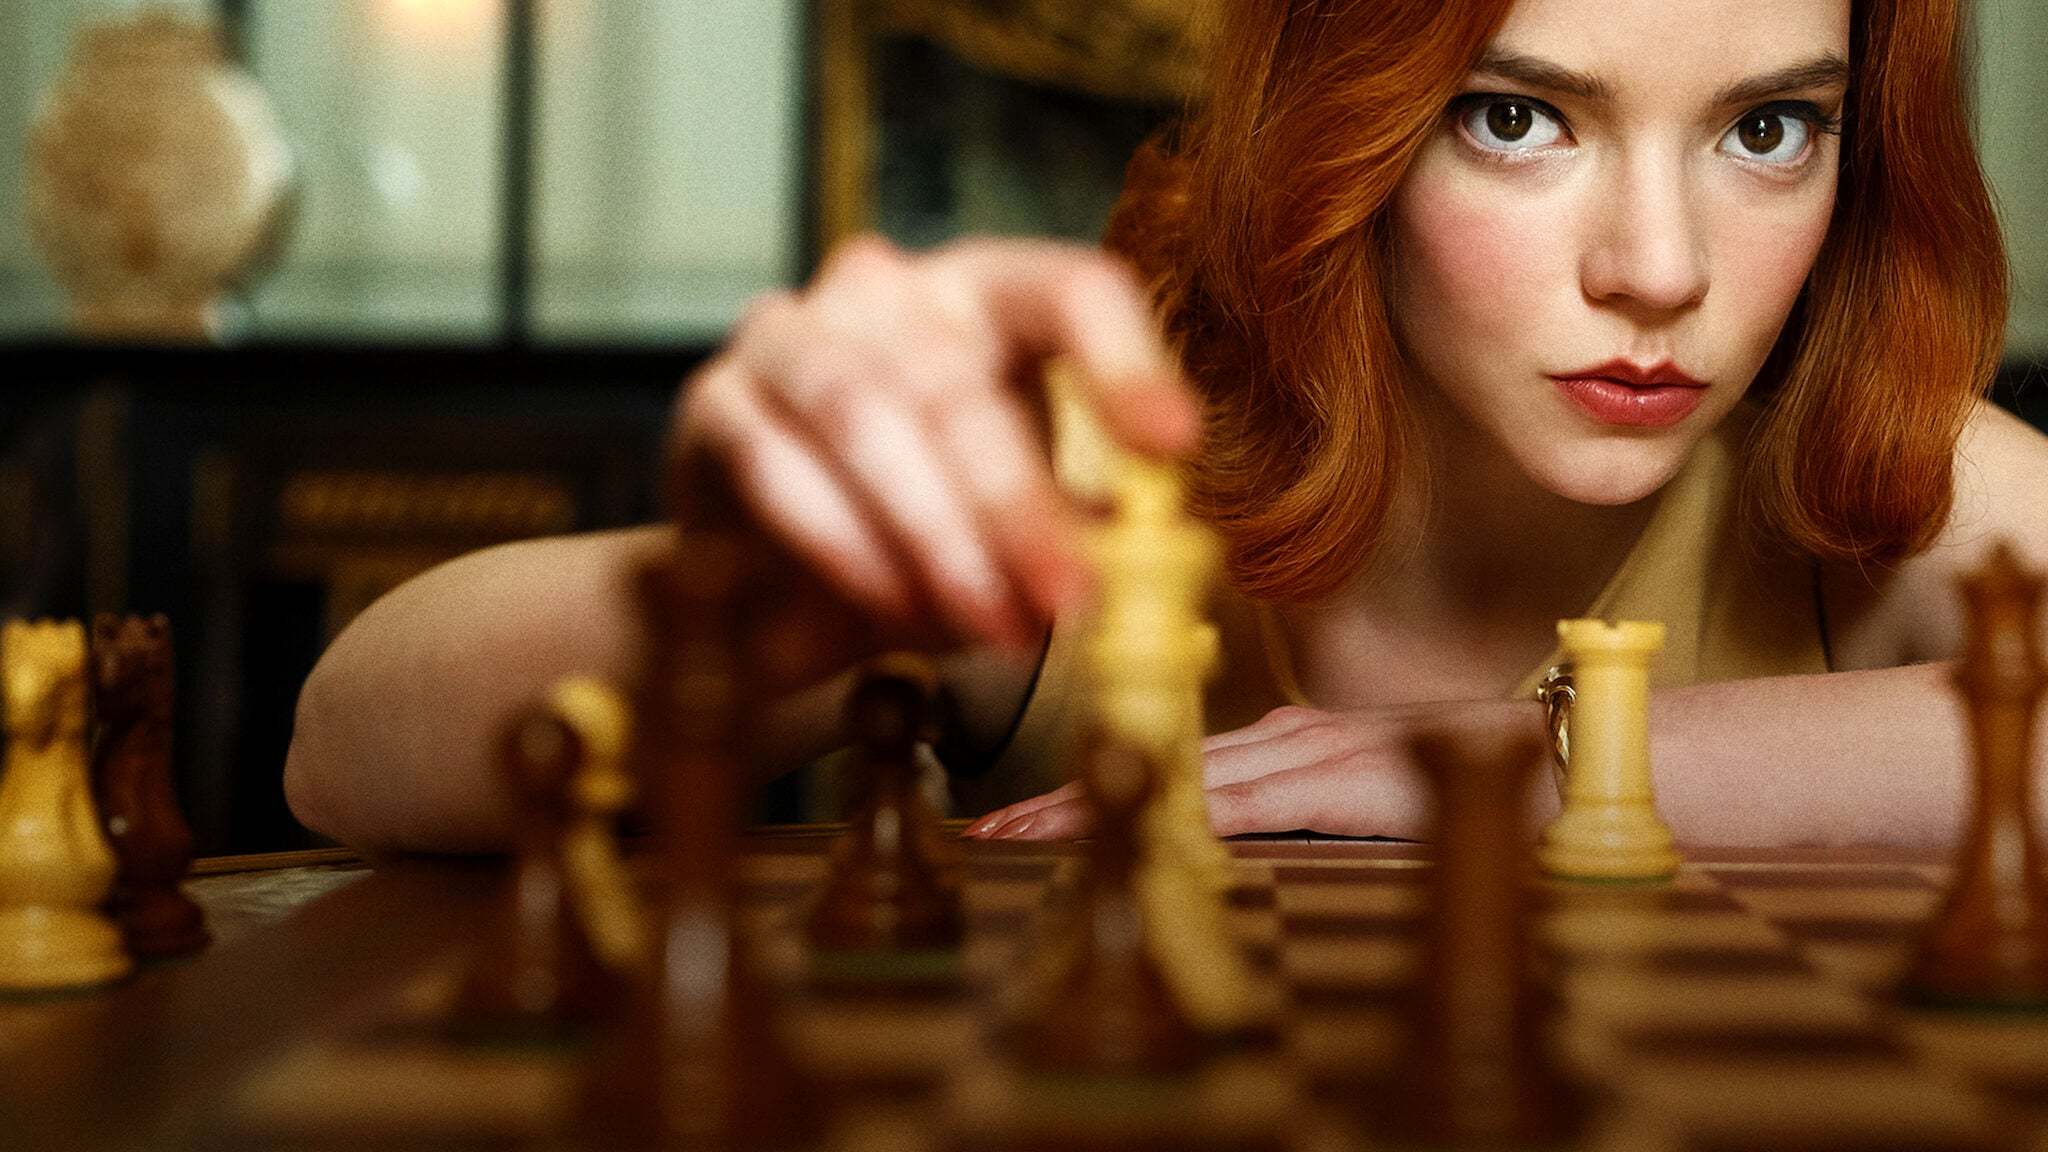 The Queen's Gambit On Netflix Has Scored A Very Rare 100% On Rotten Tomatoes